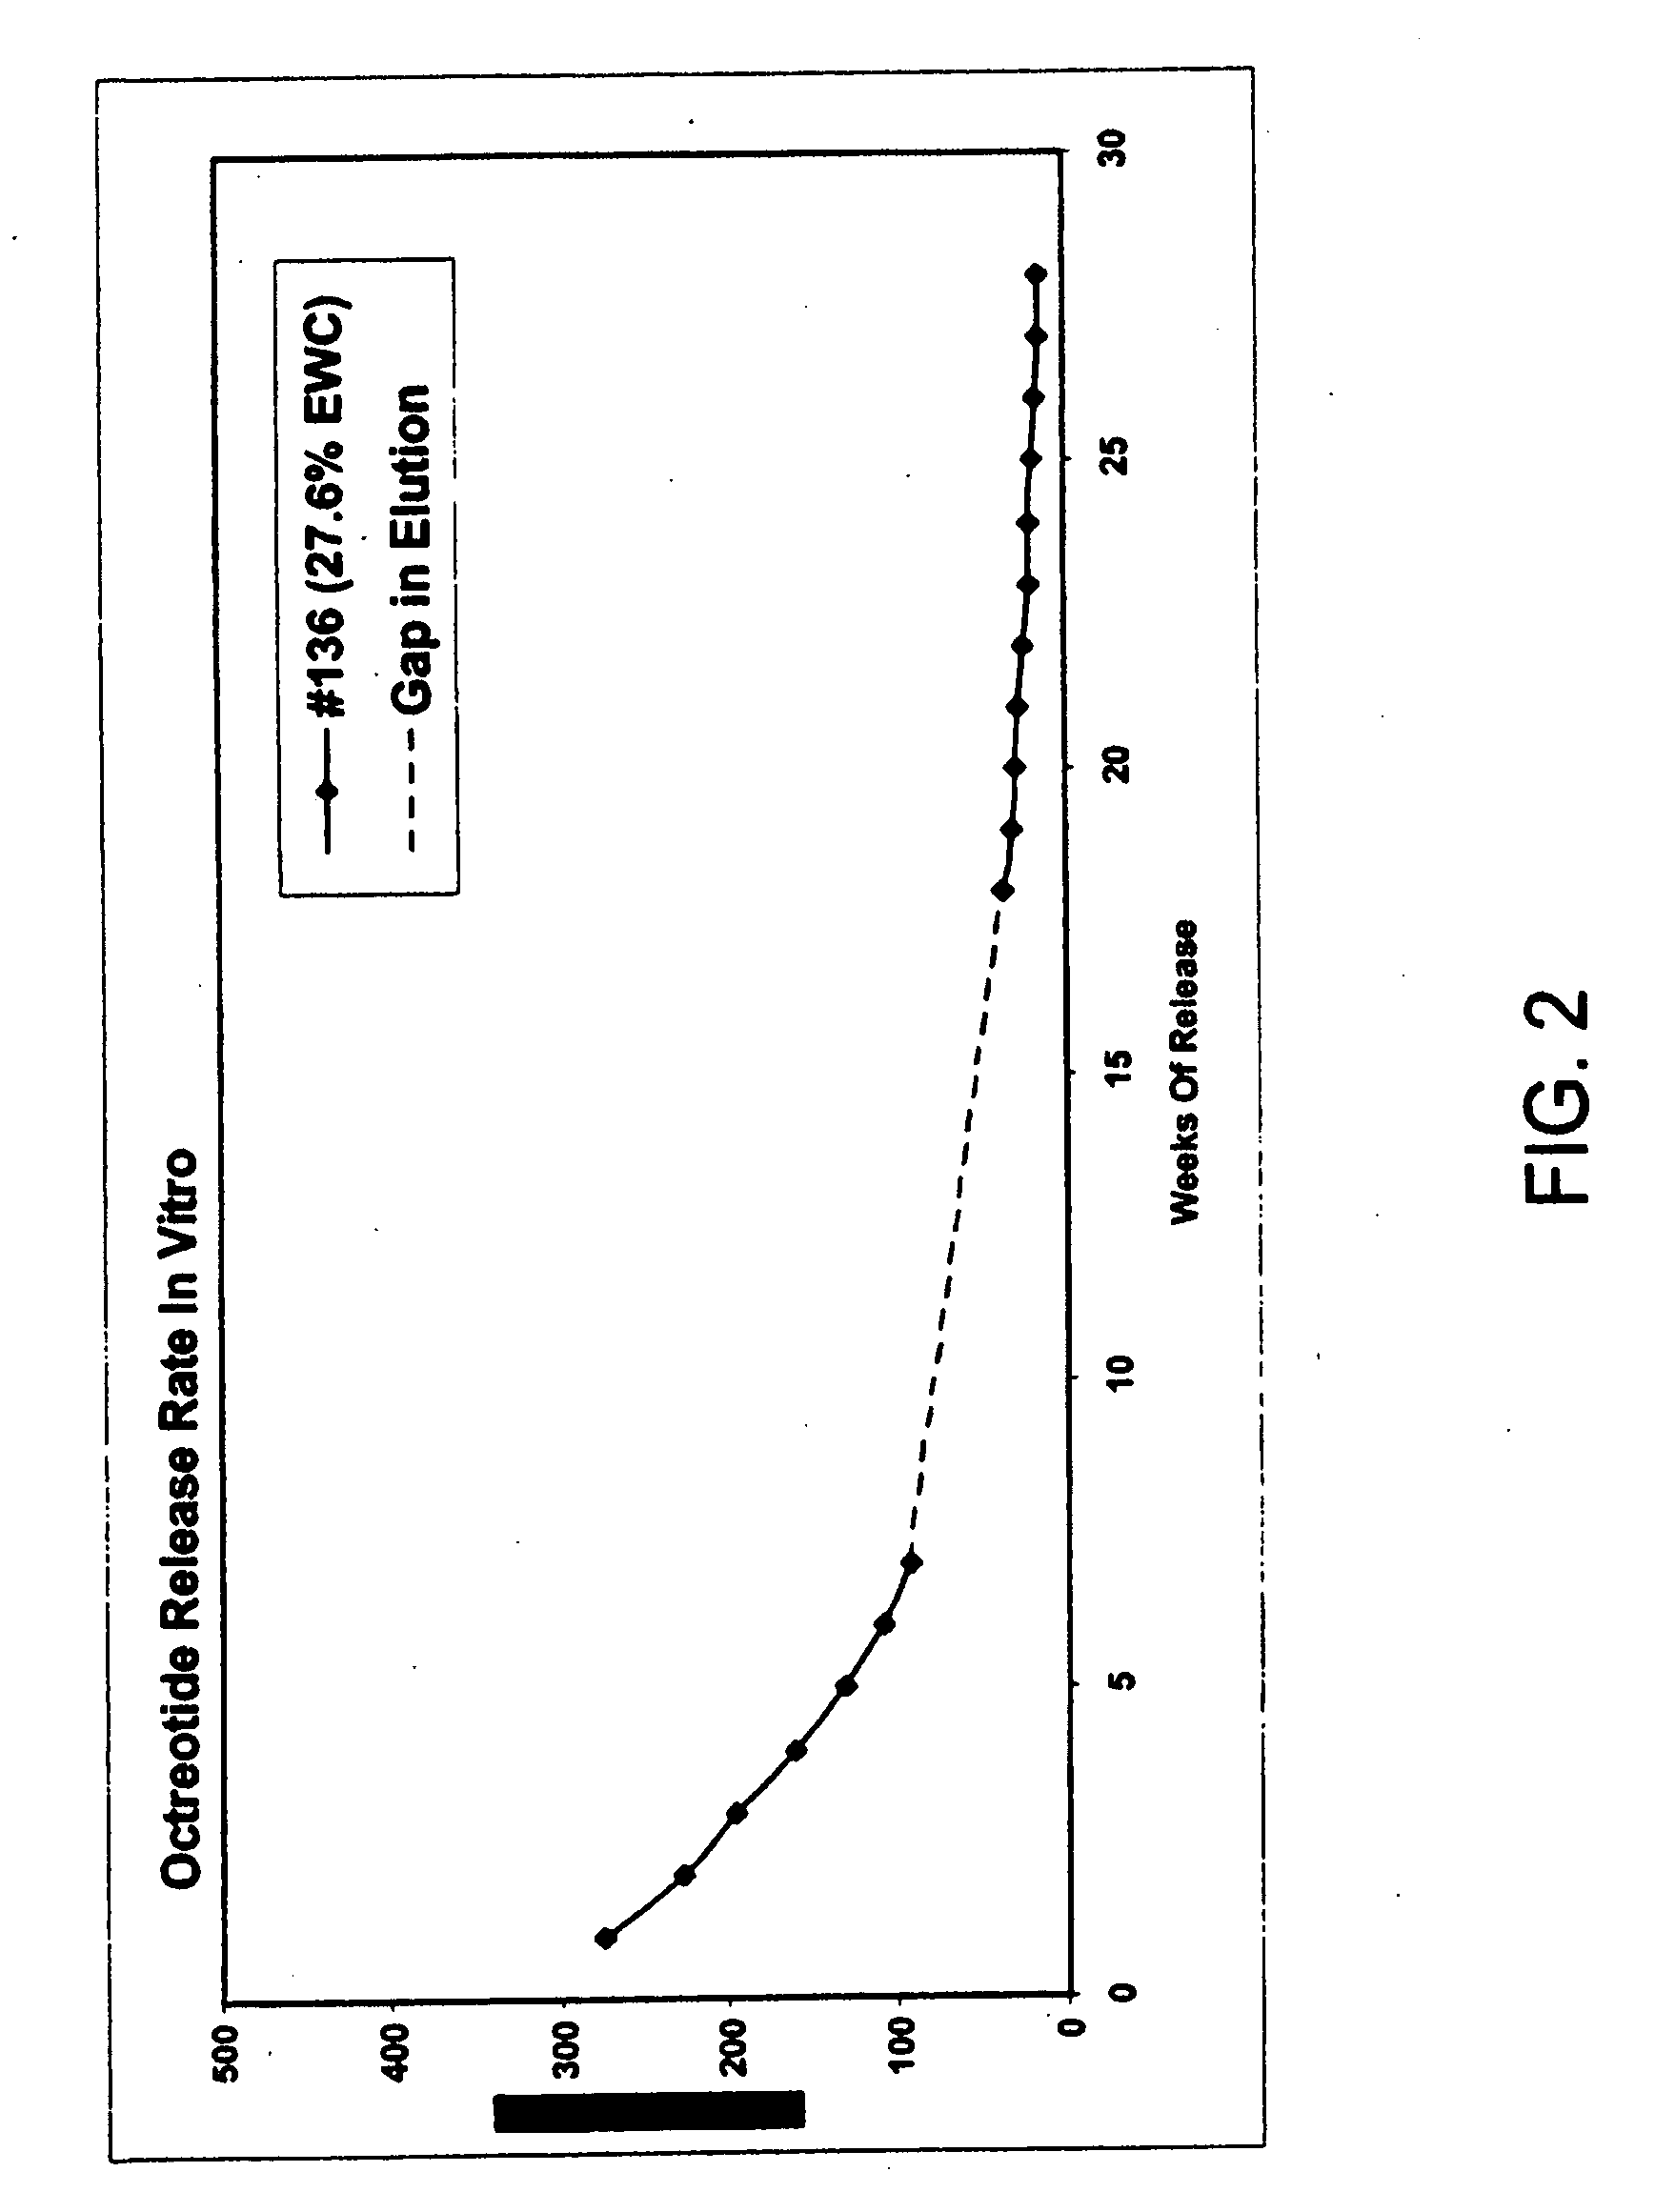 Delivery of dry formulations of octreotide